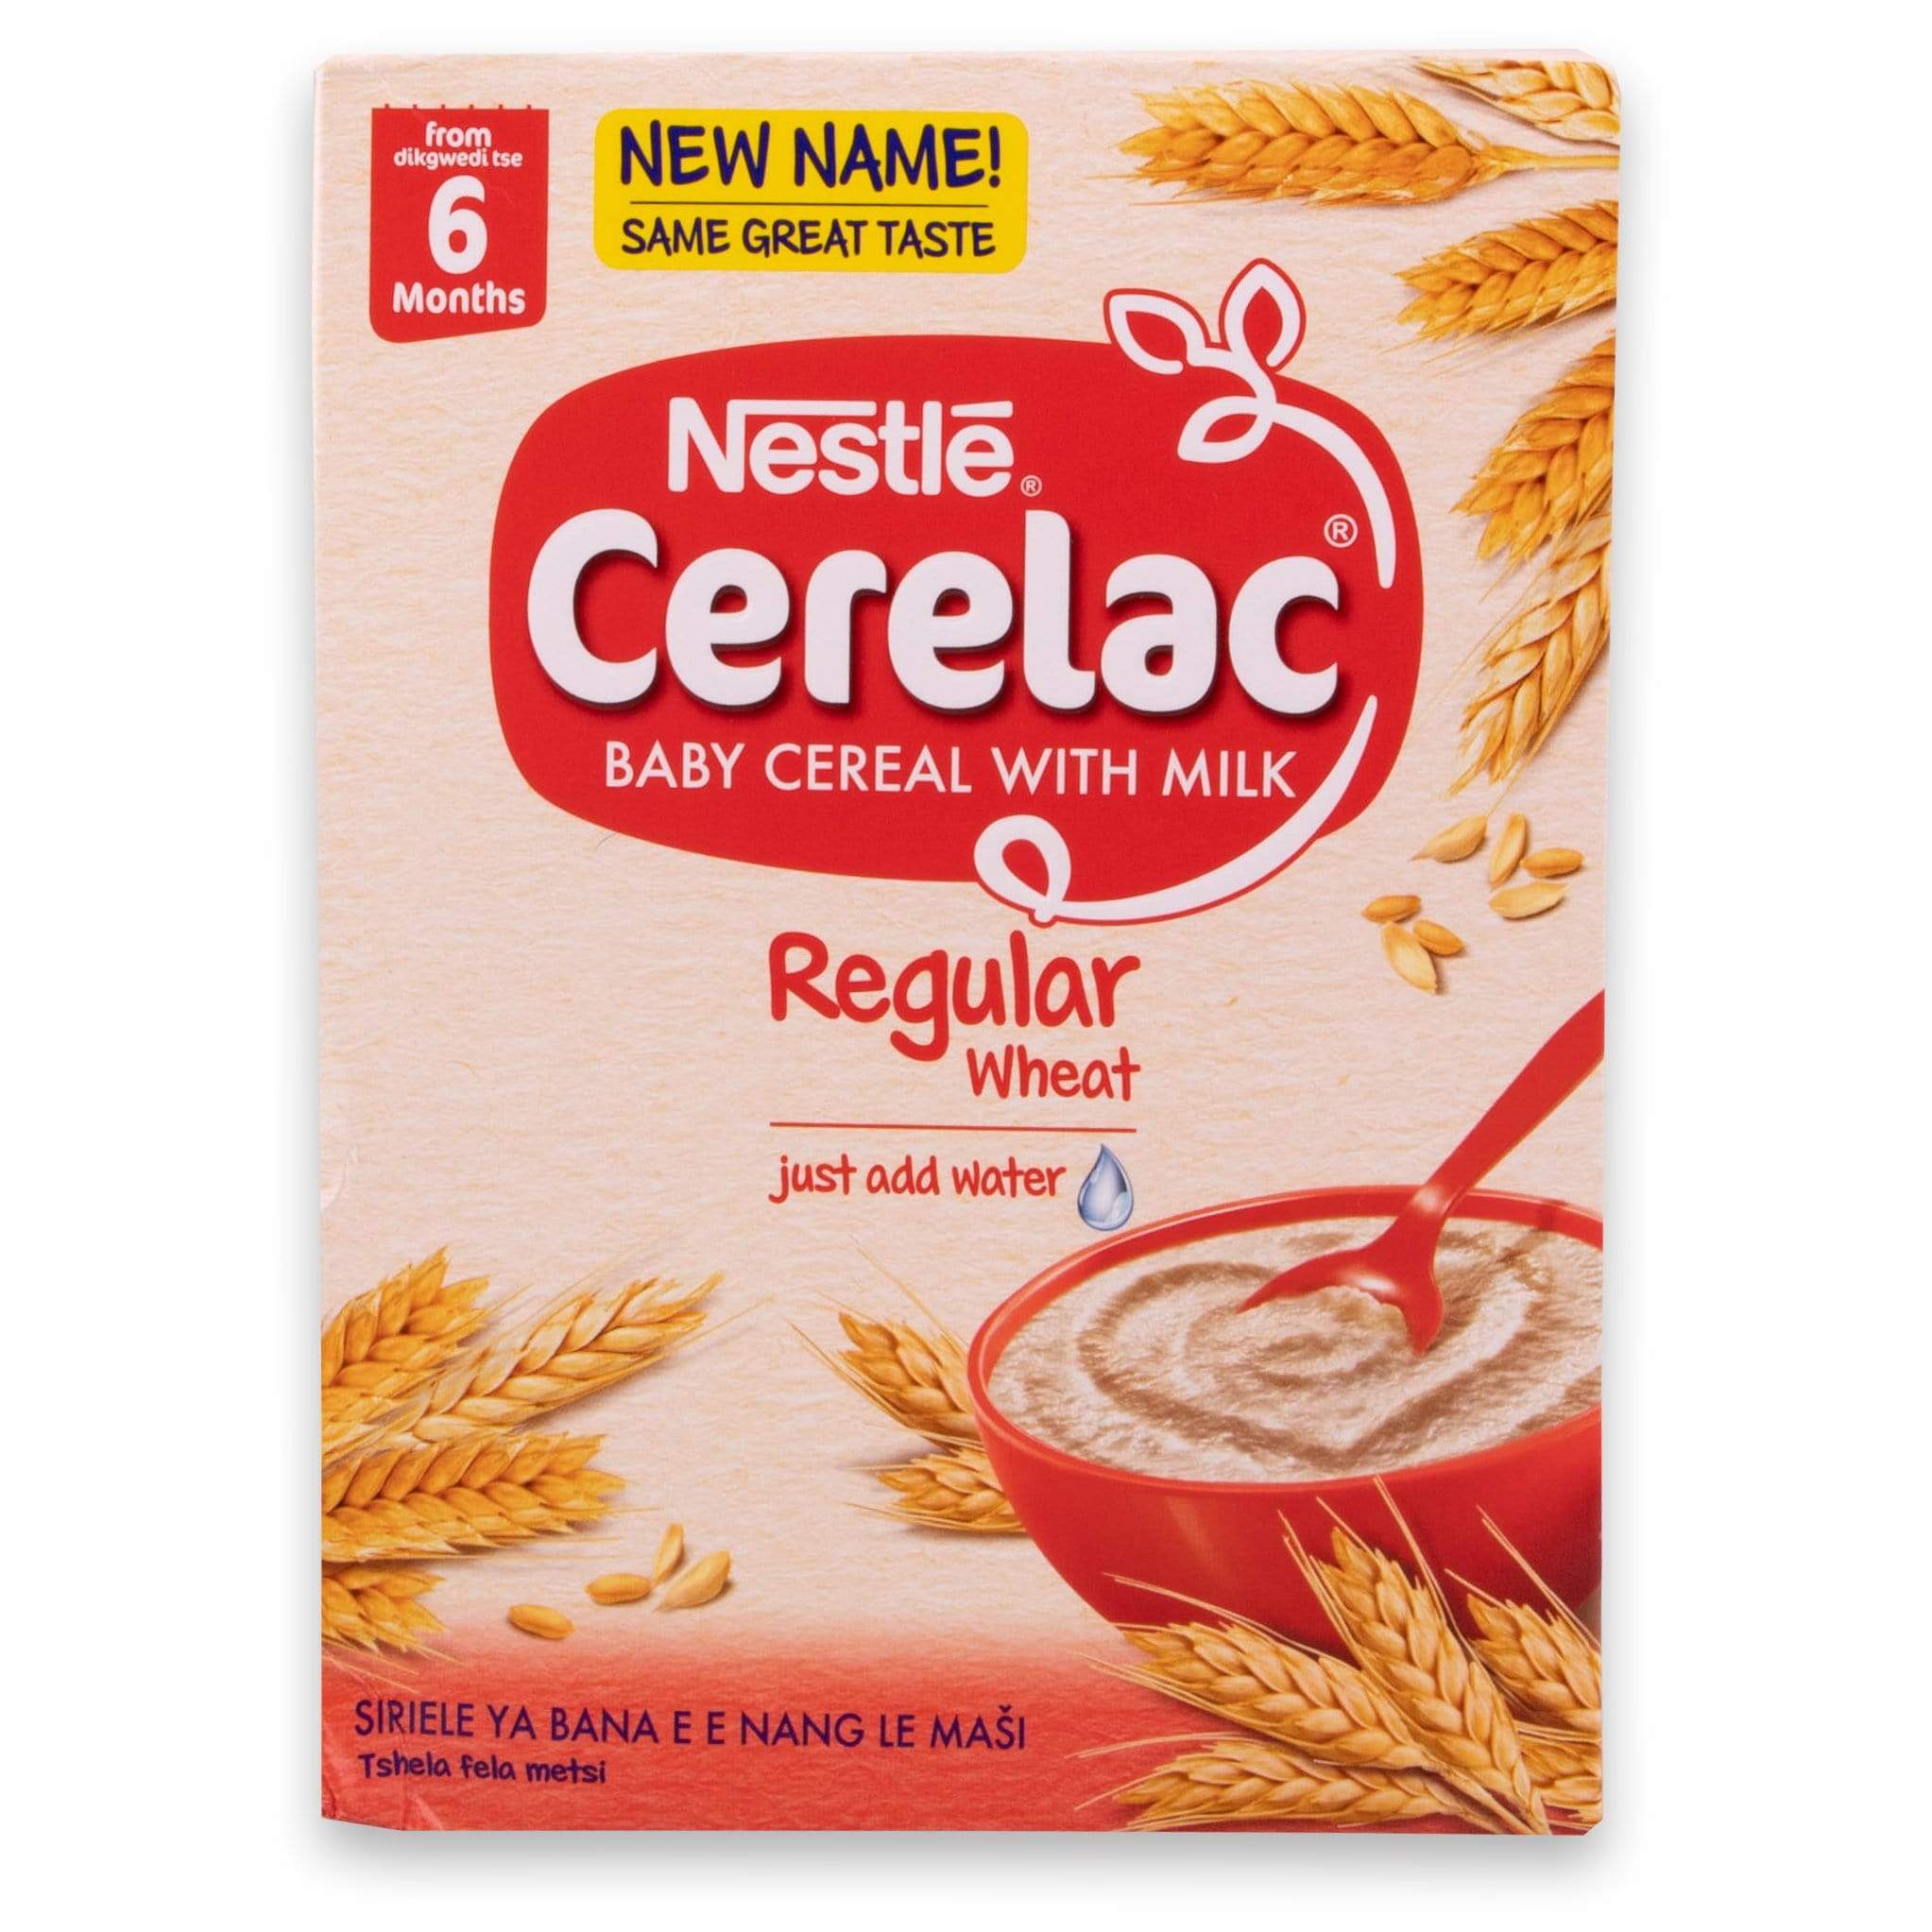 Cerelac Baby Cereal with Milk 250g Regular Wheat - From 6 Months